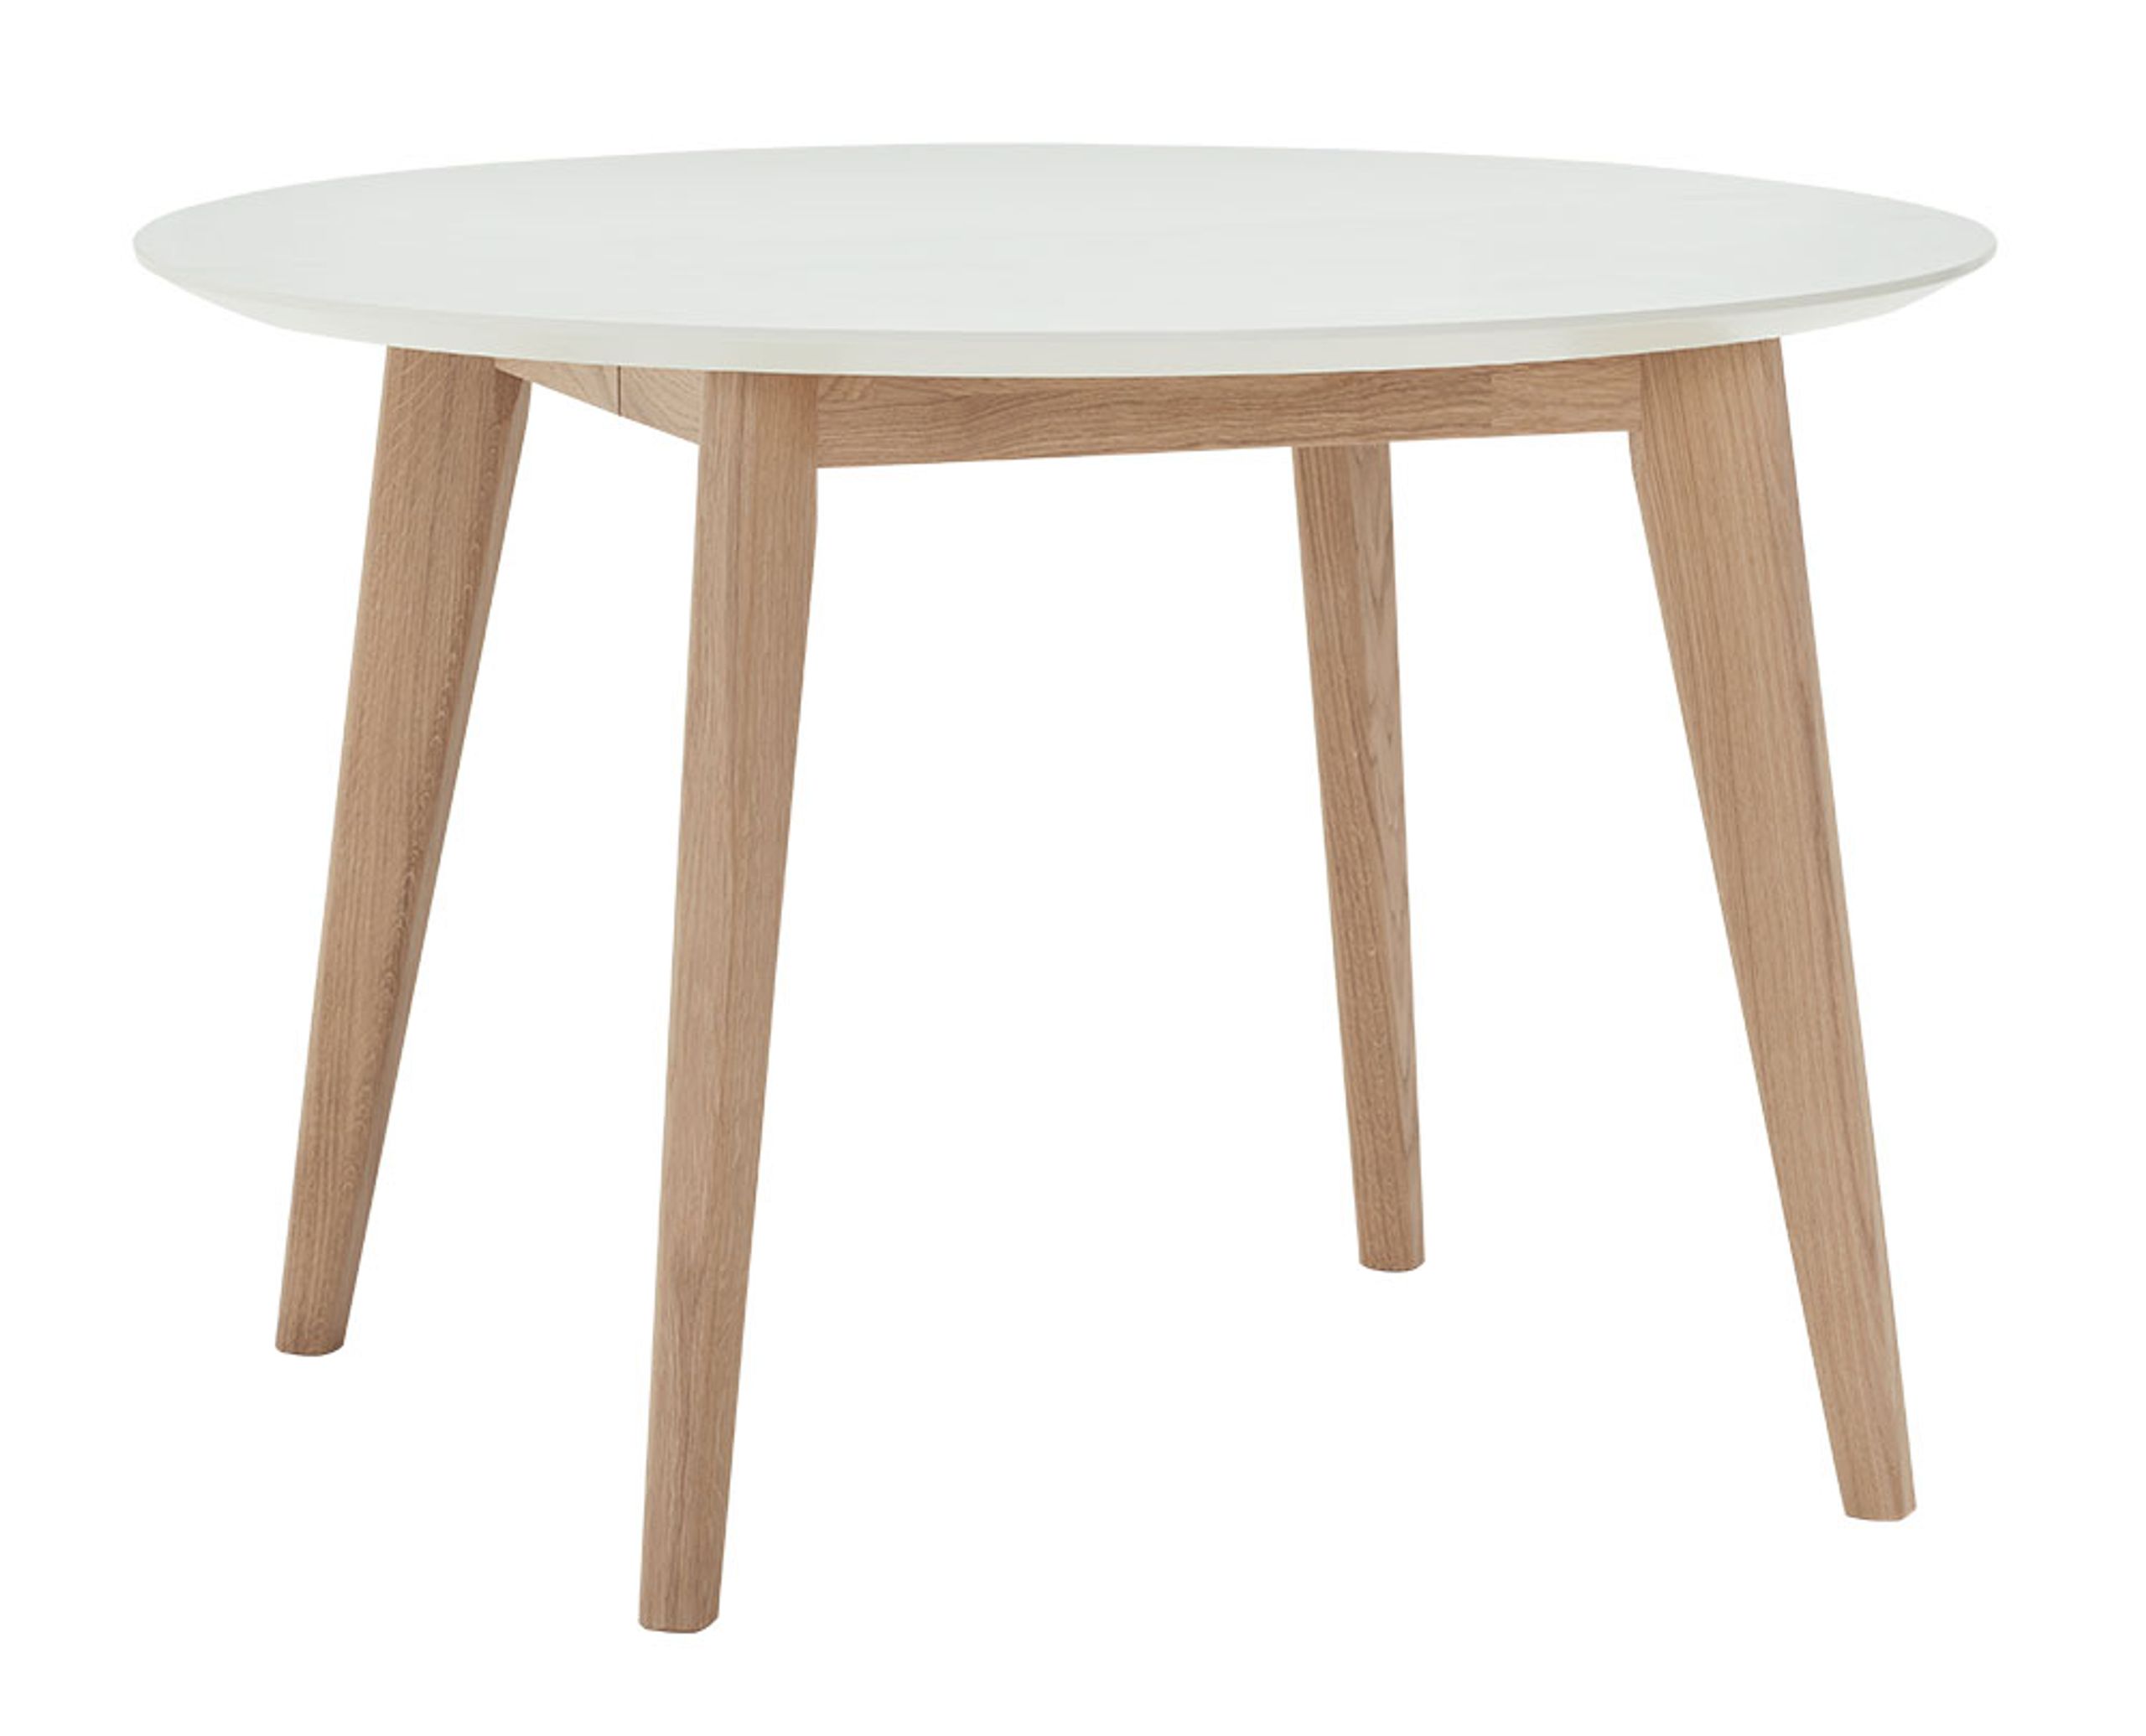 Andersen Furniture - Table à manger - AD1 Extraction Table - Laminate - White Mat Lacquered Oak/White Laminate